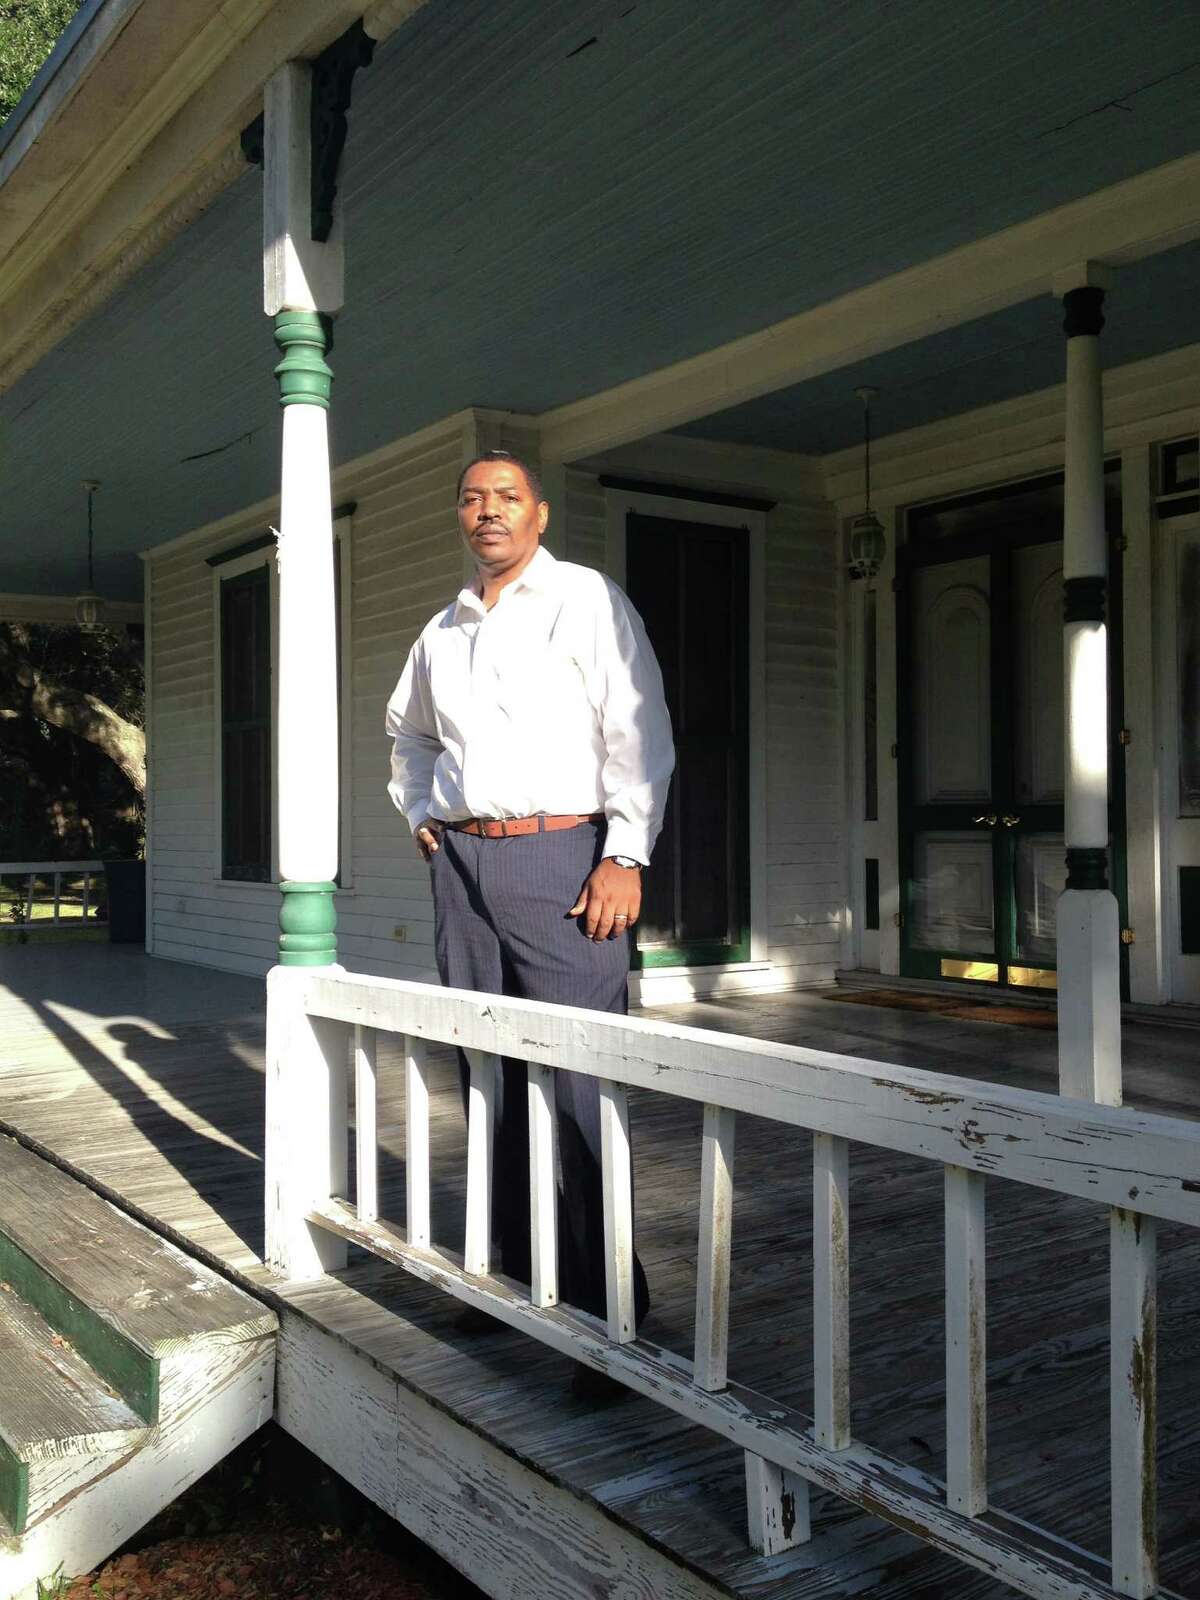 Sam Collins﻿ hopes to turn the home of Confederate Army veteran Henry Martyn Stringfellow into a learning center for the community.